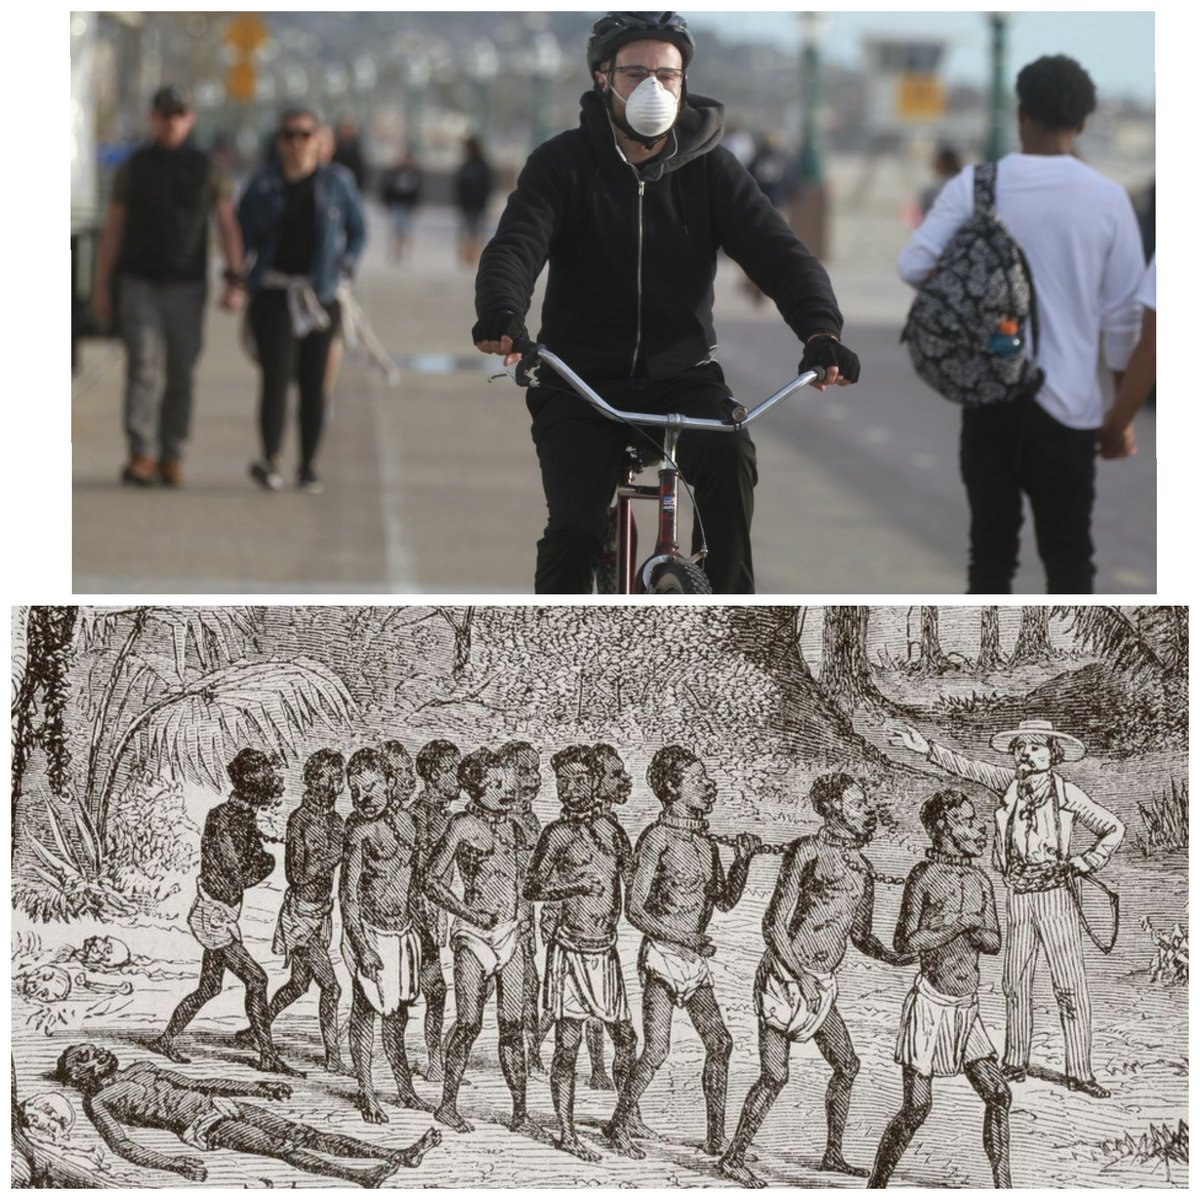 Top pic: a guy freely riding his bike with a mask on.Bottom pic: the trans-atlantic slave trade.Note: the bottom pic is there the oppression and tyranny happened.